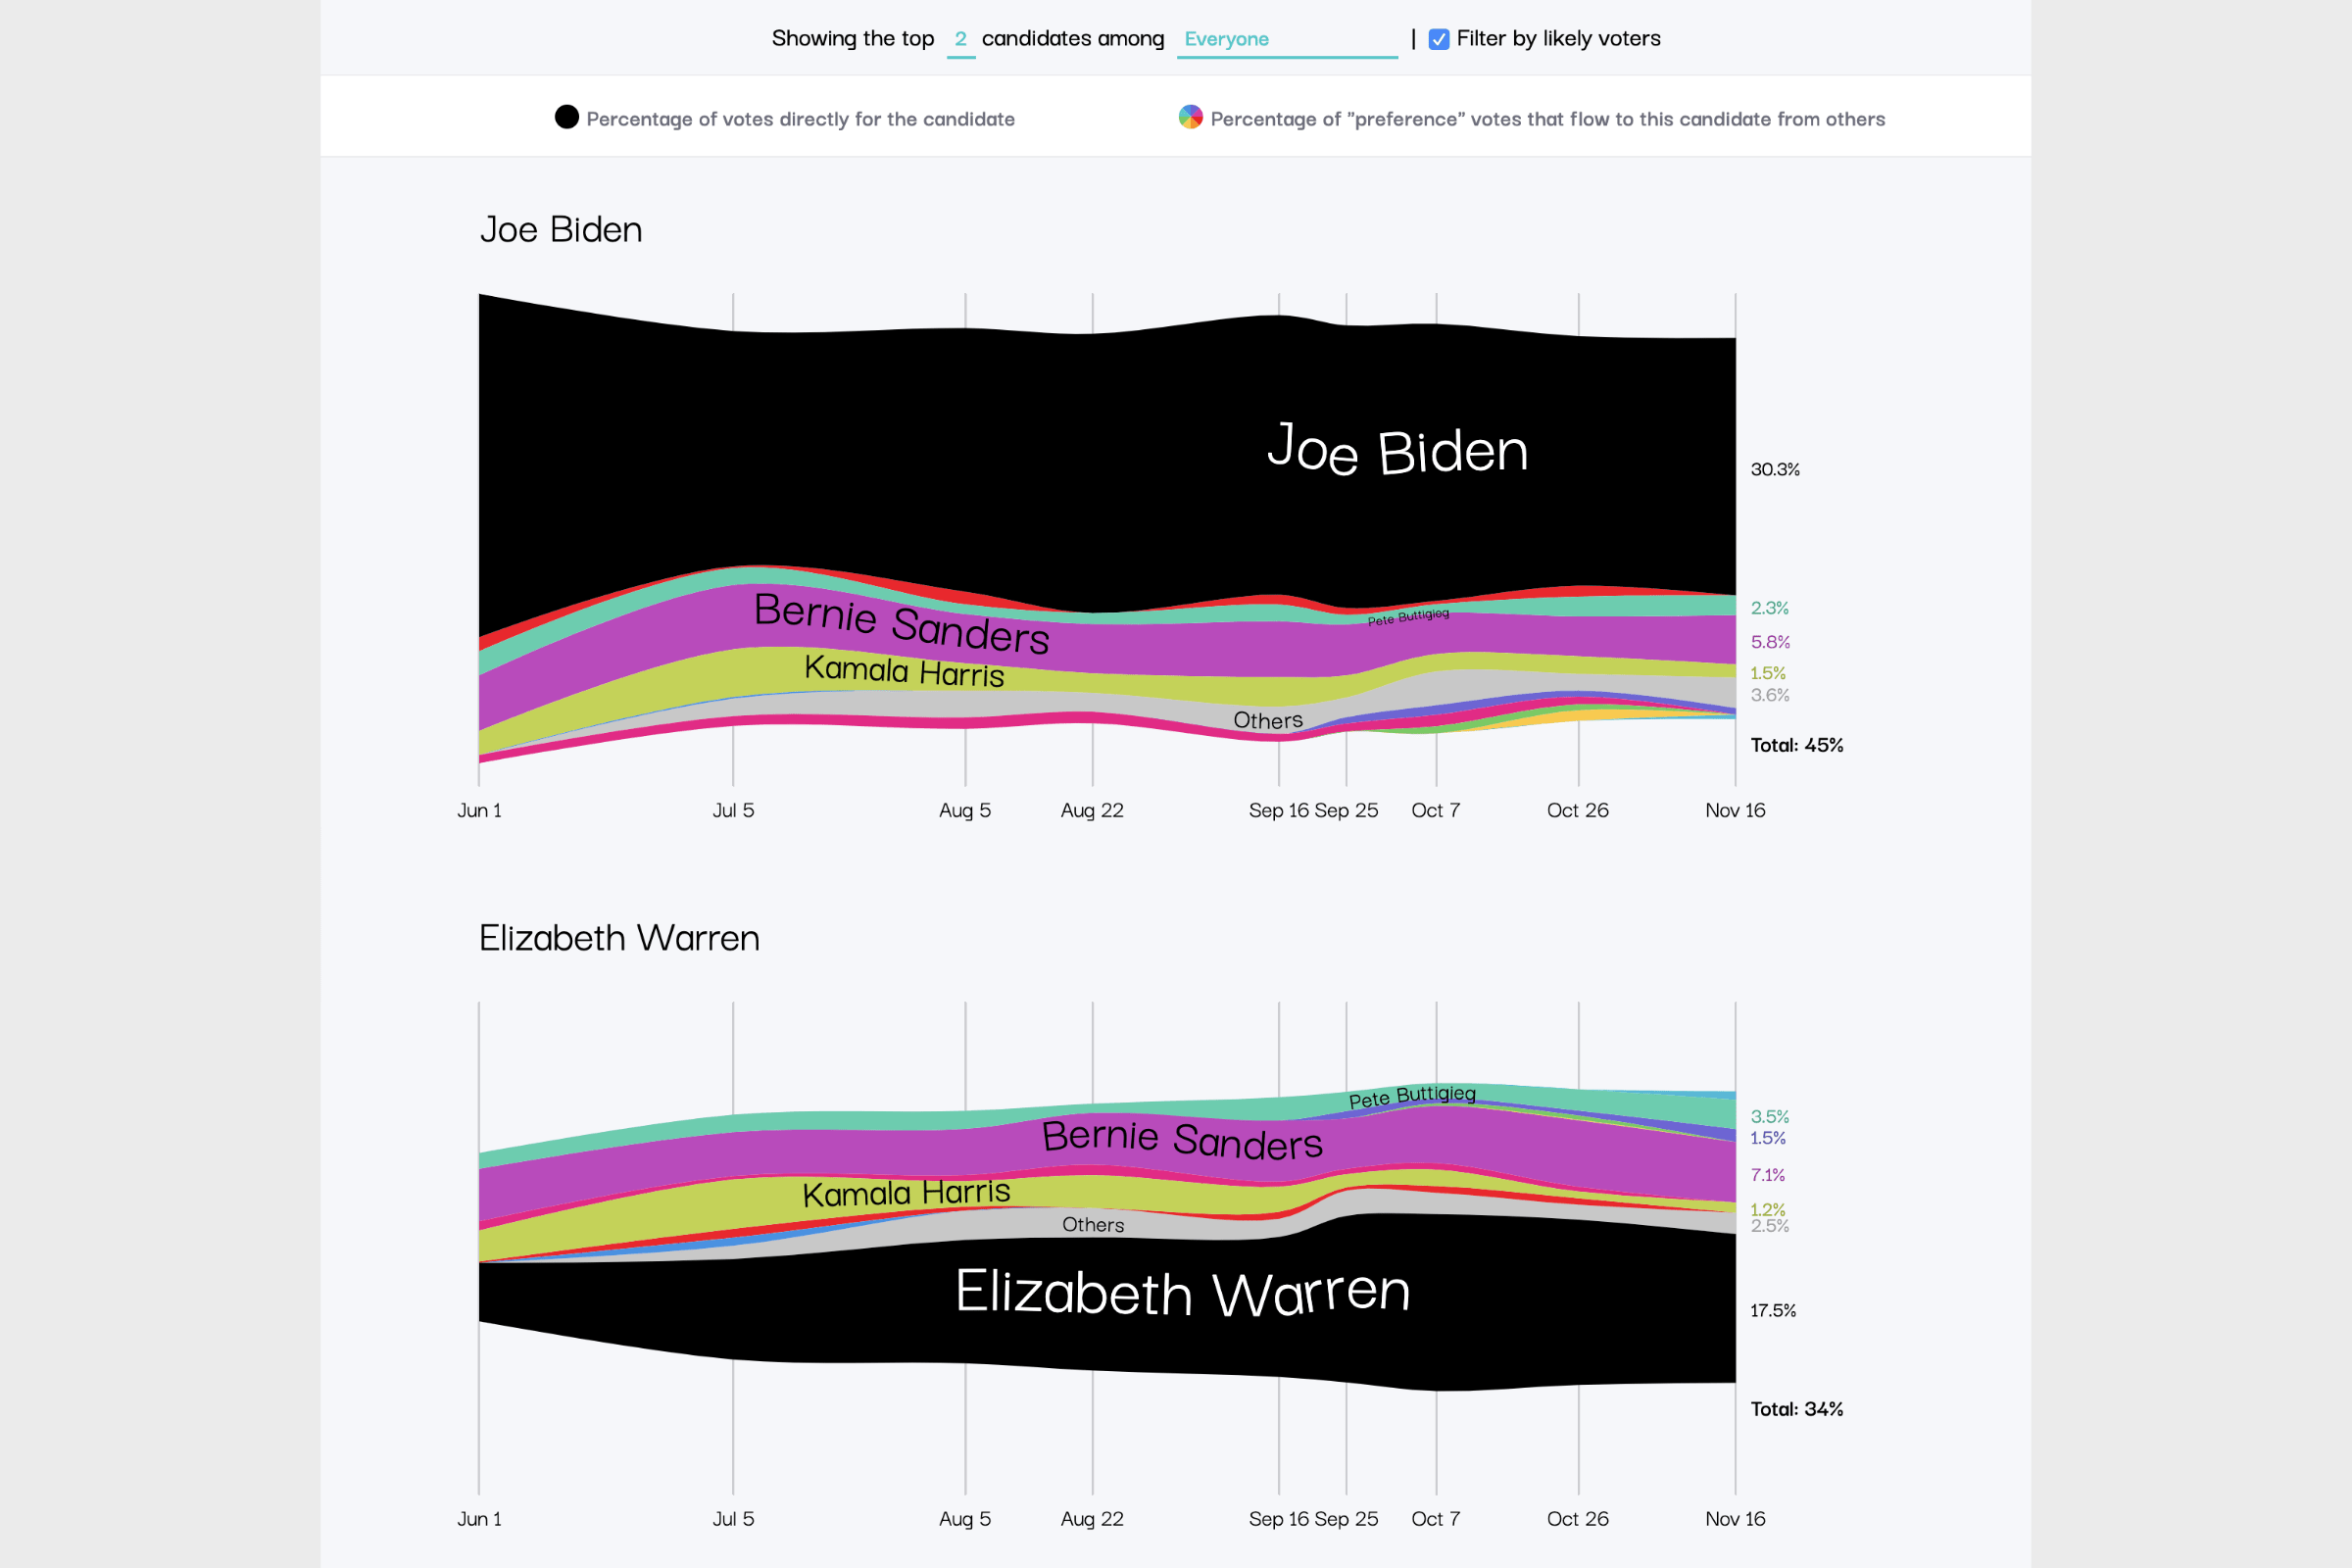 The Streamgraph that reveals the polling results over time